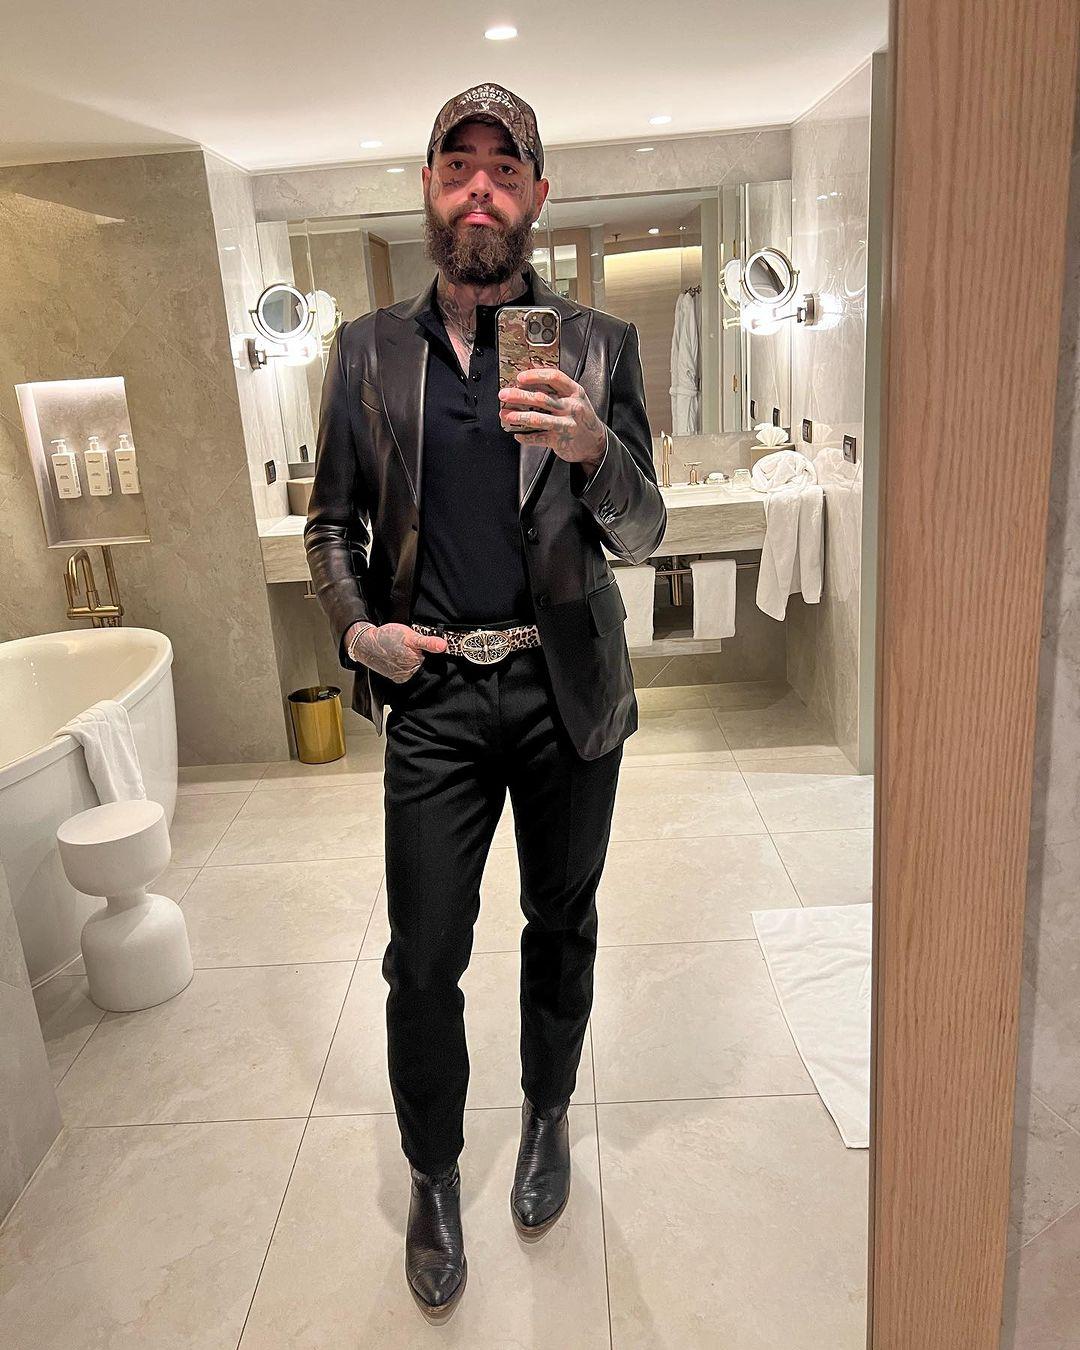 Fans In Awe As Post Malone Clean Up Nice In New Mirror Selfie